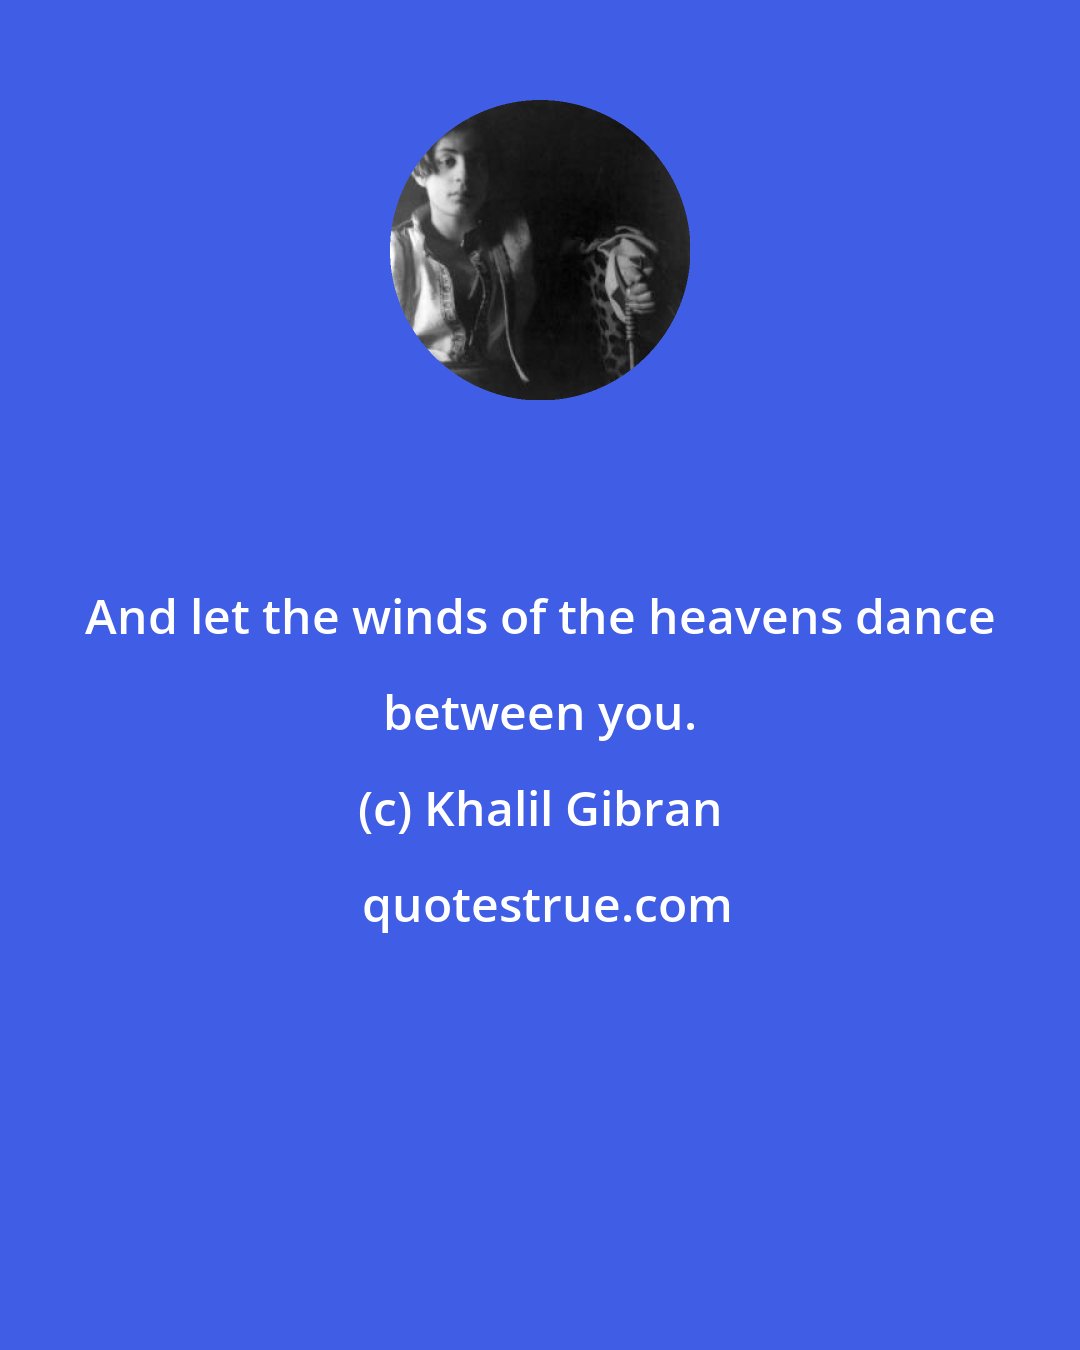 Khalil Gibran: And let the winds of the heavens dance between you.